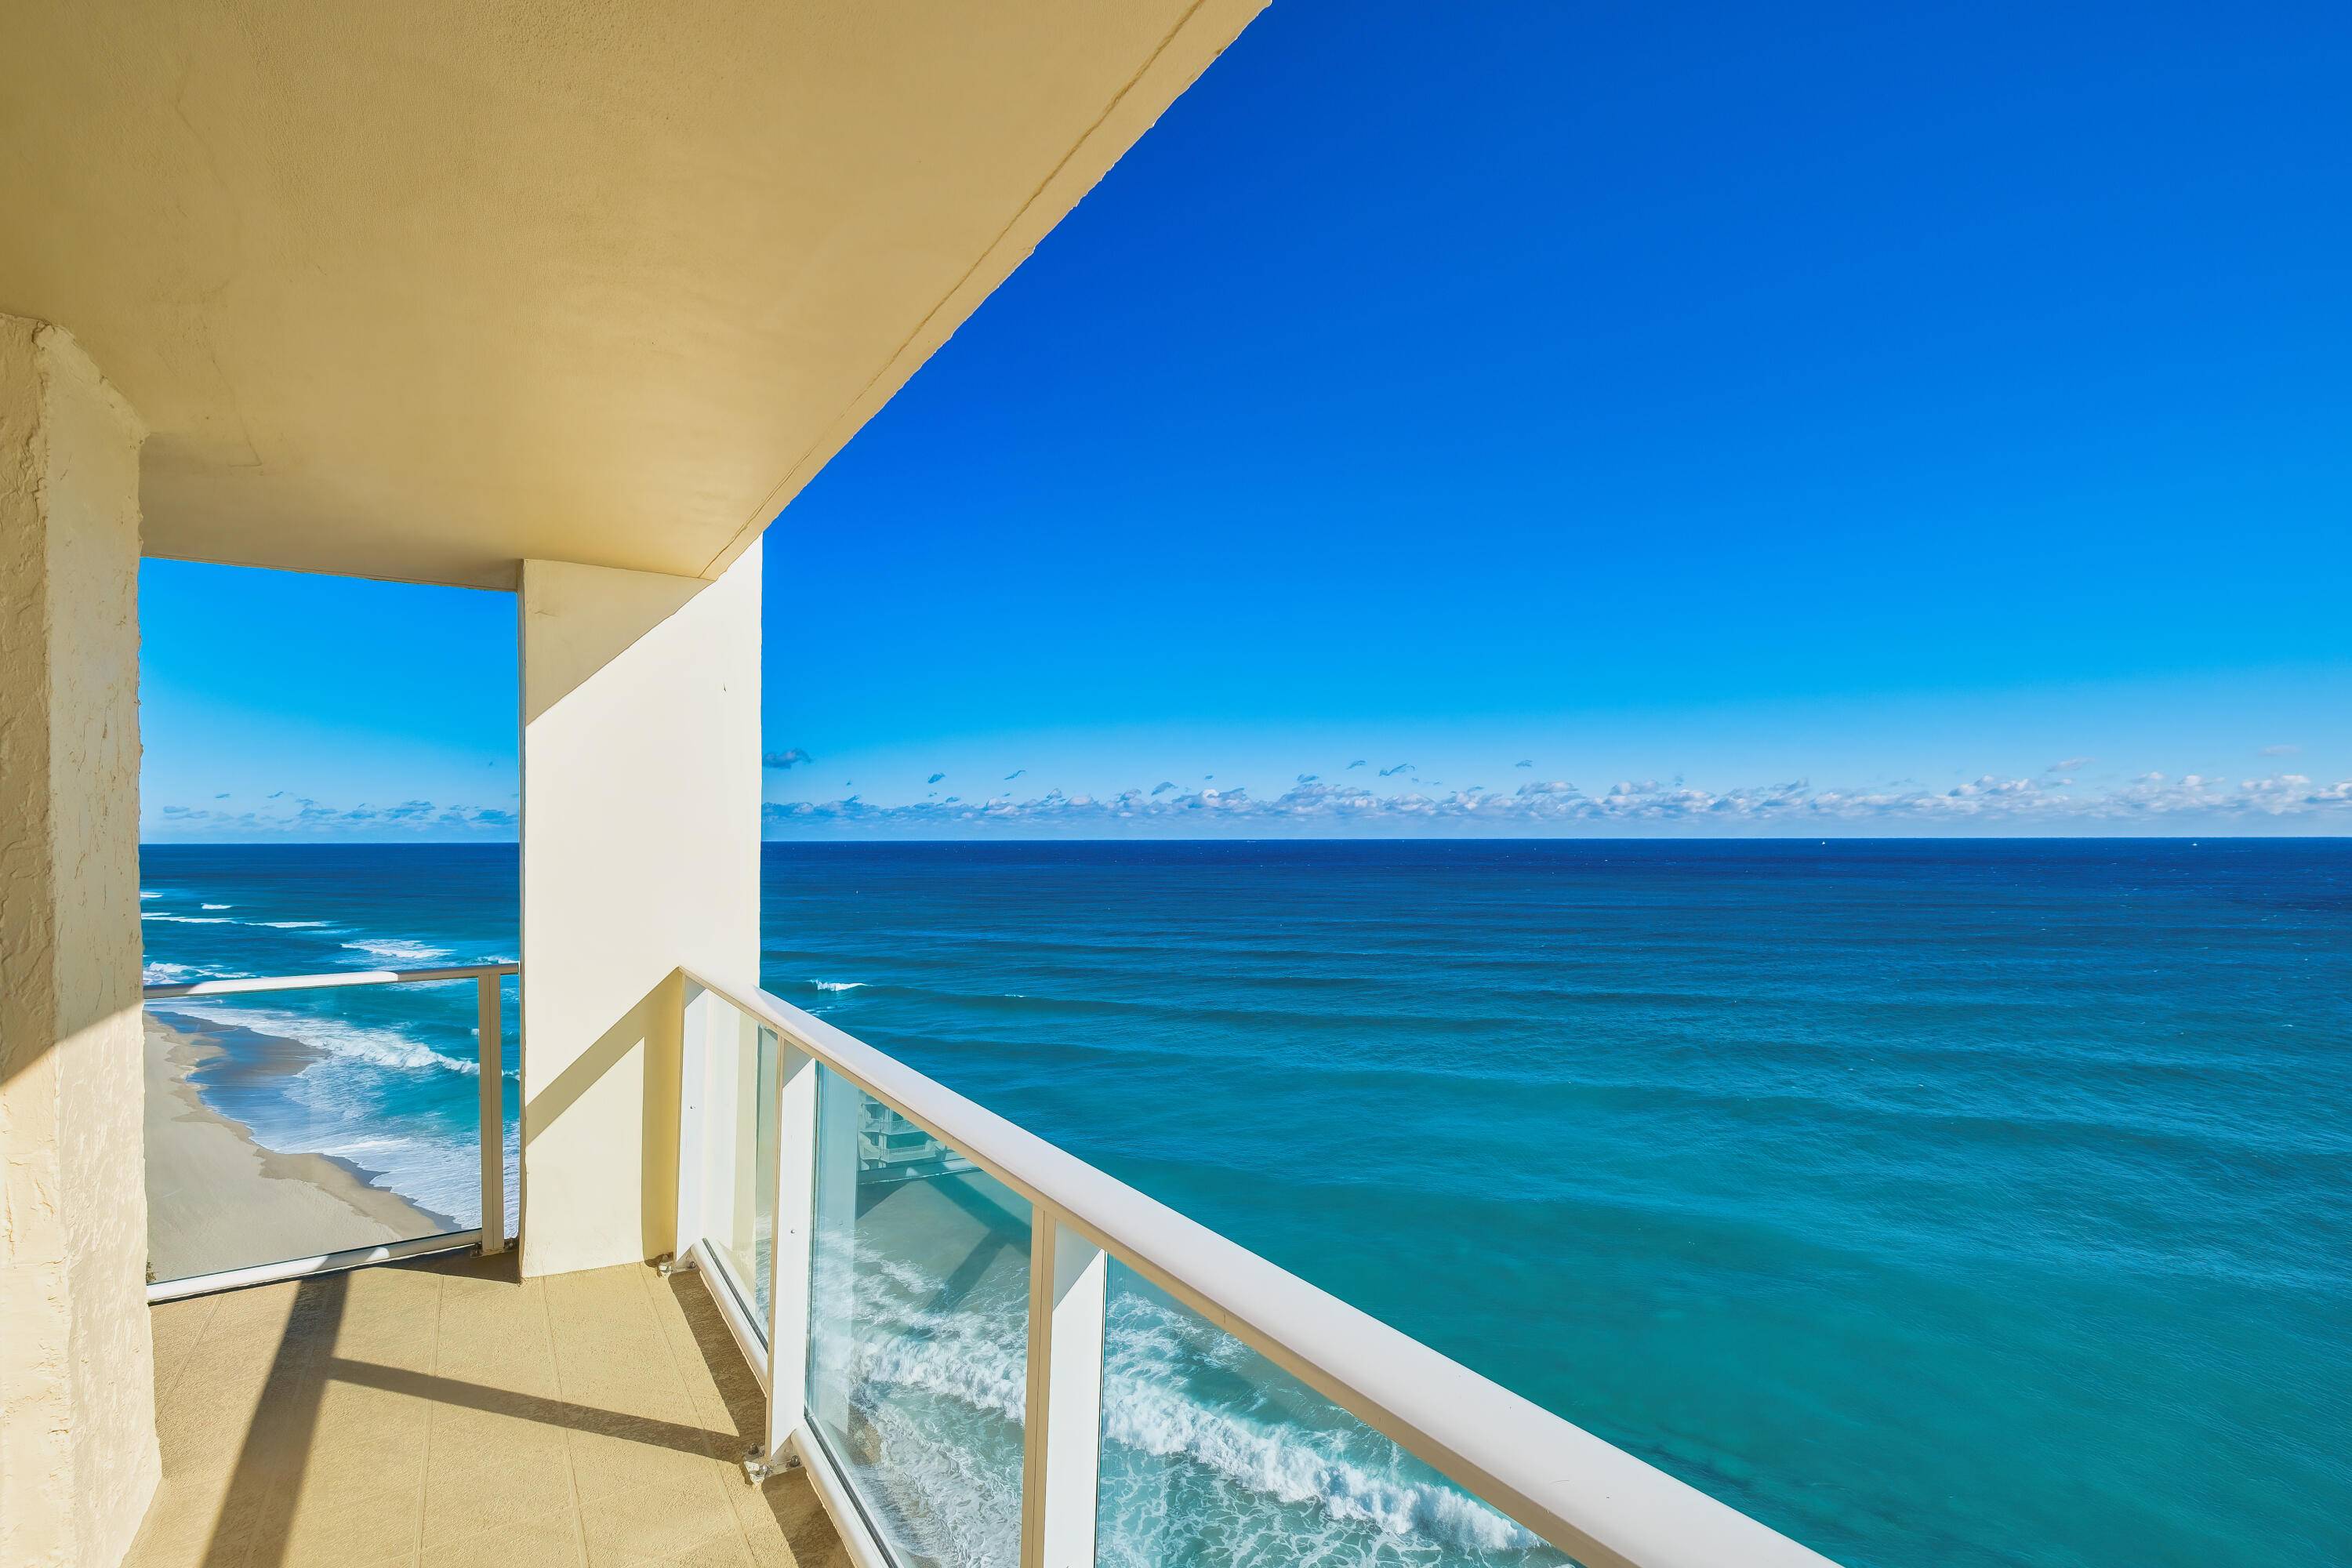 Experience coastal living at its finest in this stunning northeast corner residence with breathtaking, uninterrupted ocean views from every room including the living room, dining room, kitchen, and both bedrooms.